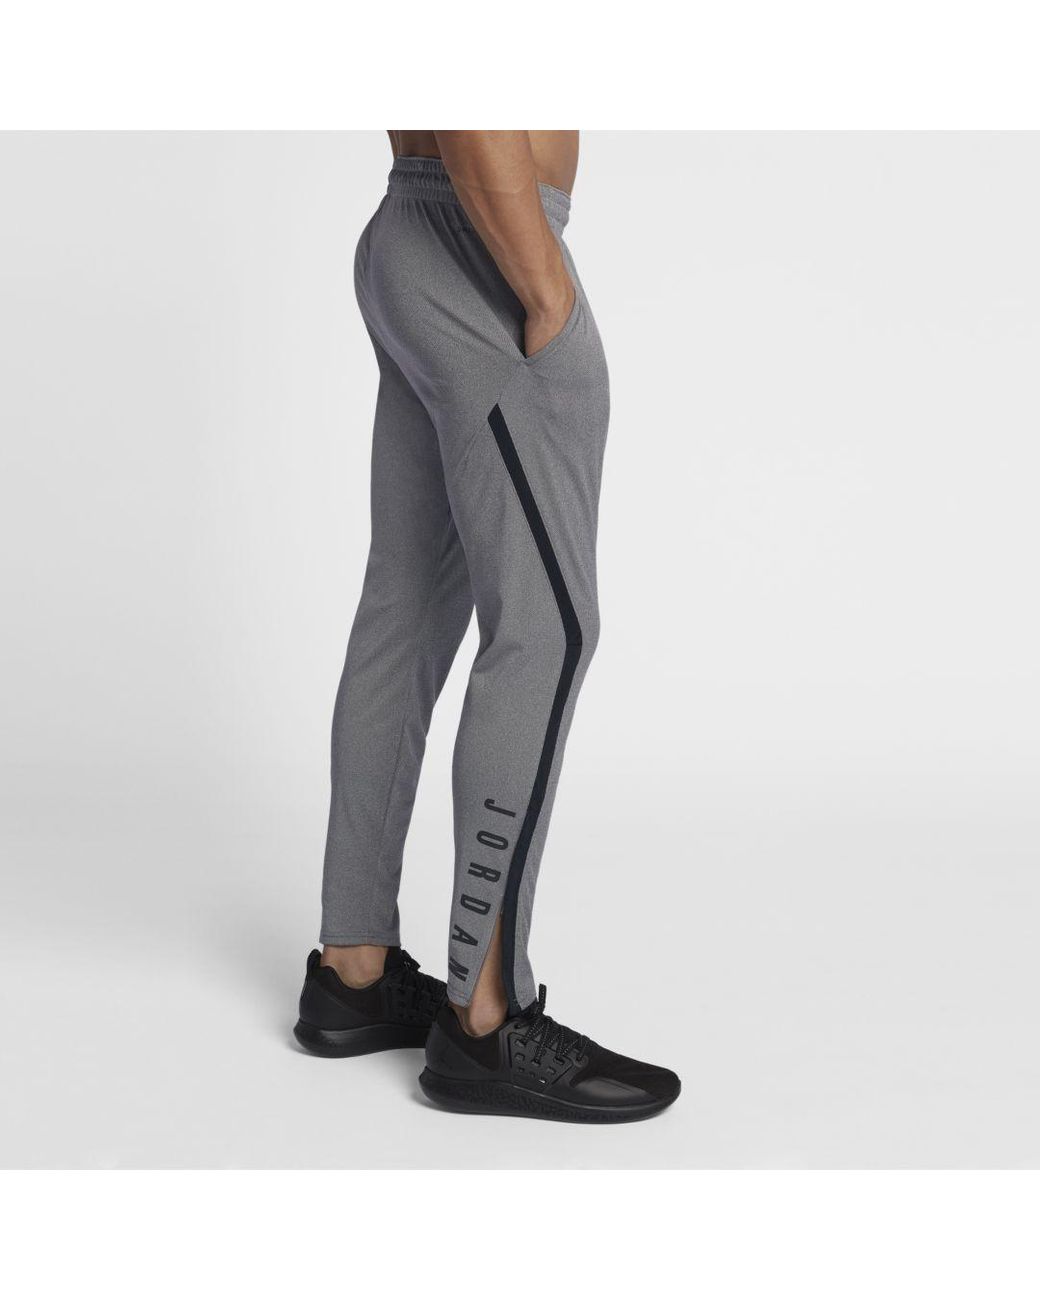 Monarchy At risk Concentration Nike Jordan 23 Alpha Dri-fit Pants (carbon Heather) - Clearance Sale in  Gray for Men | Lyst